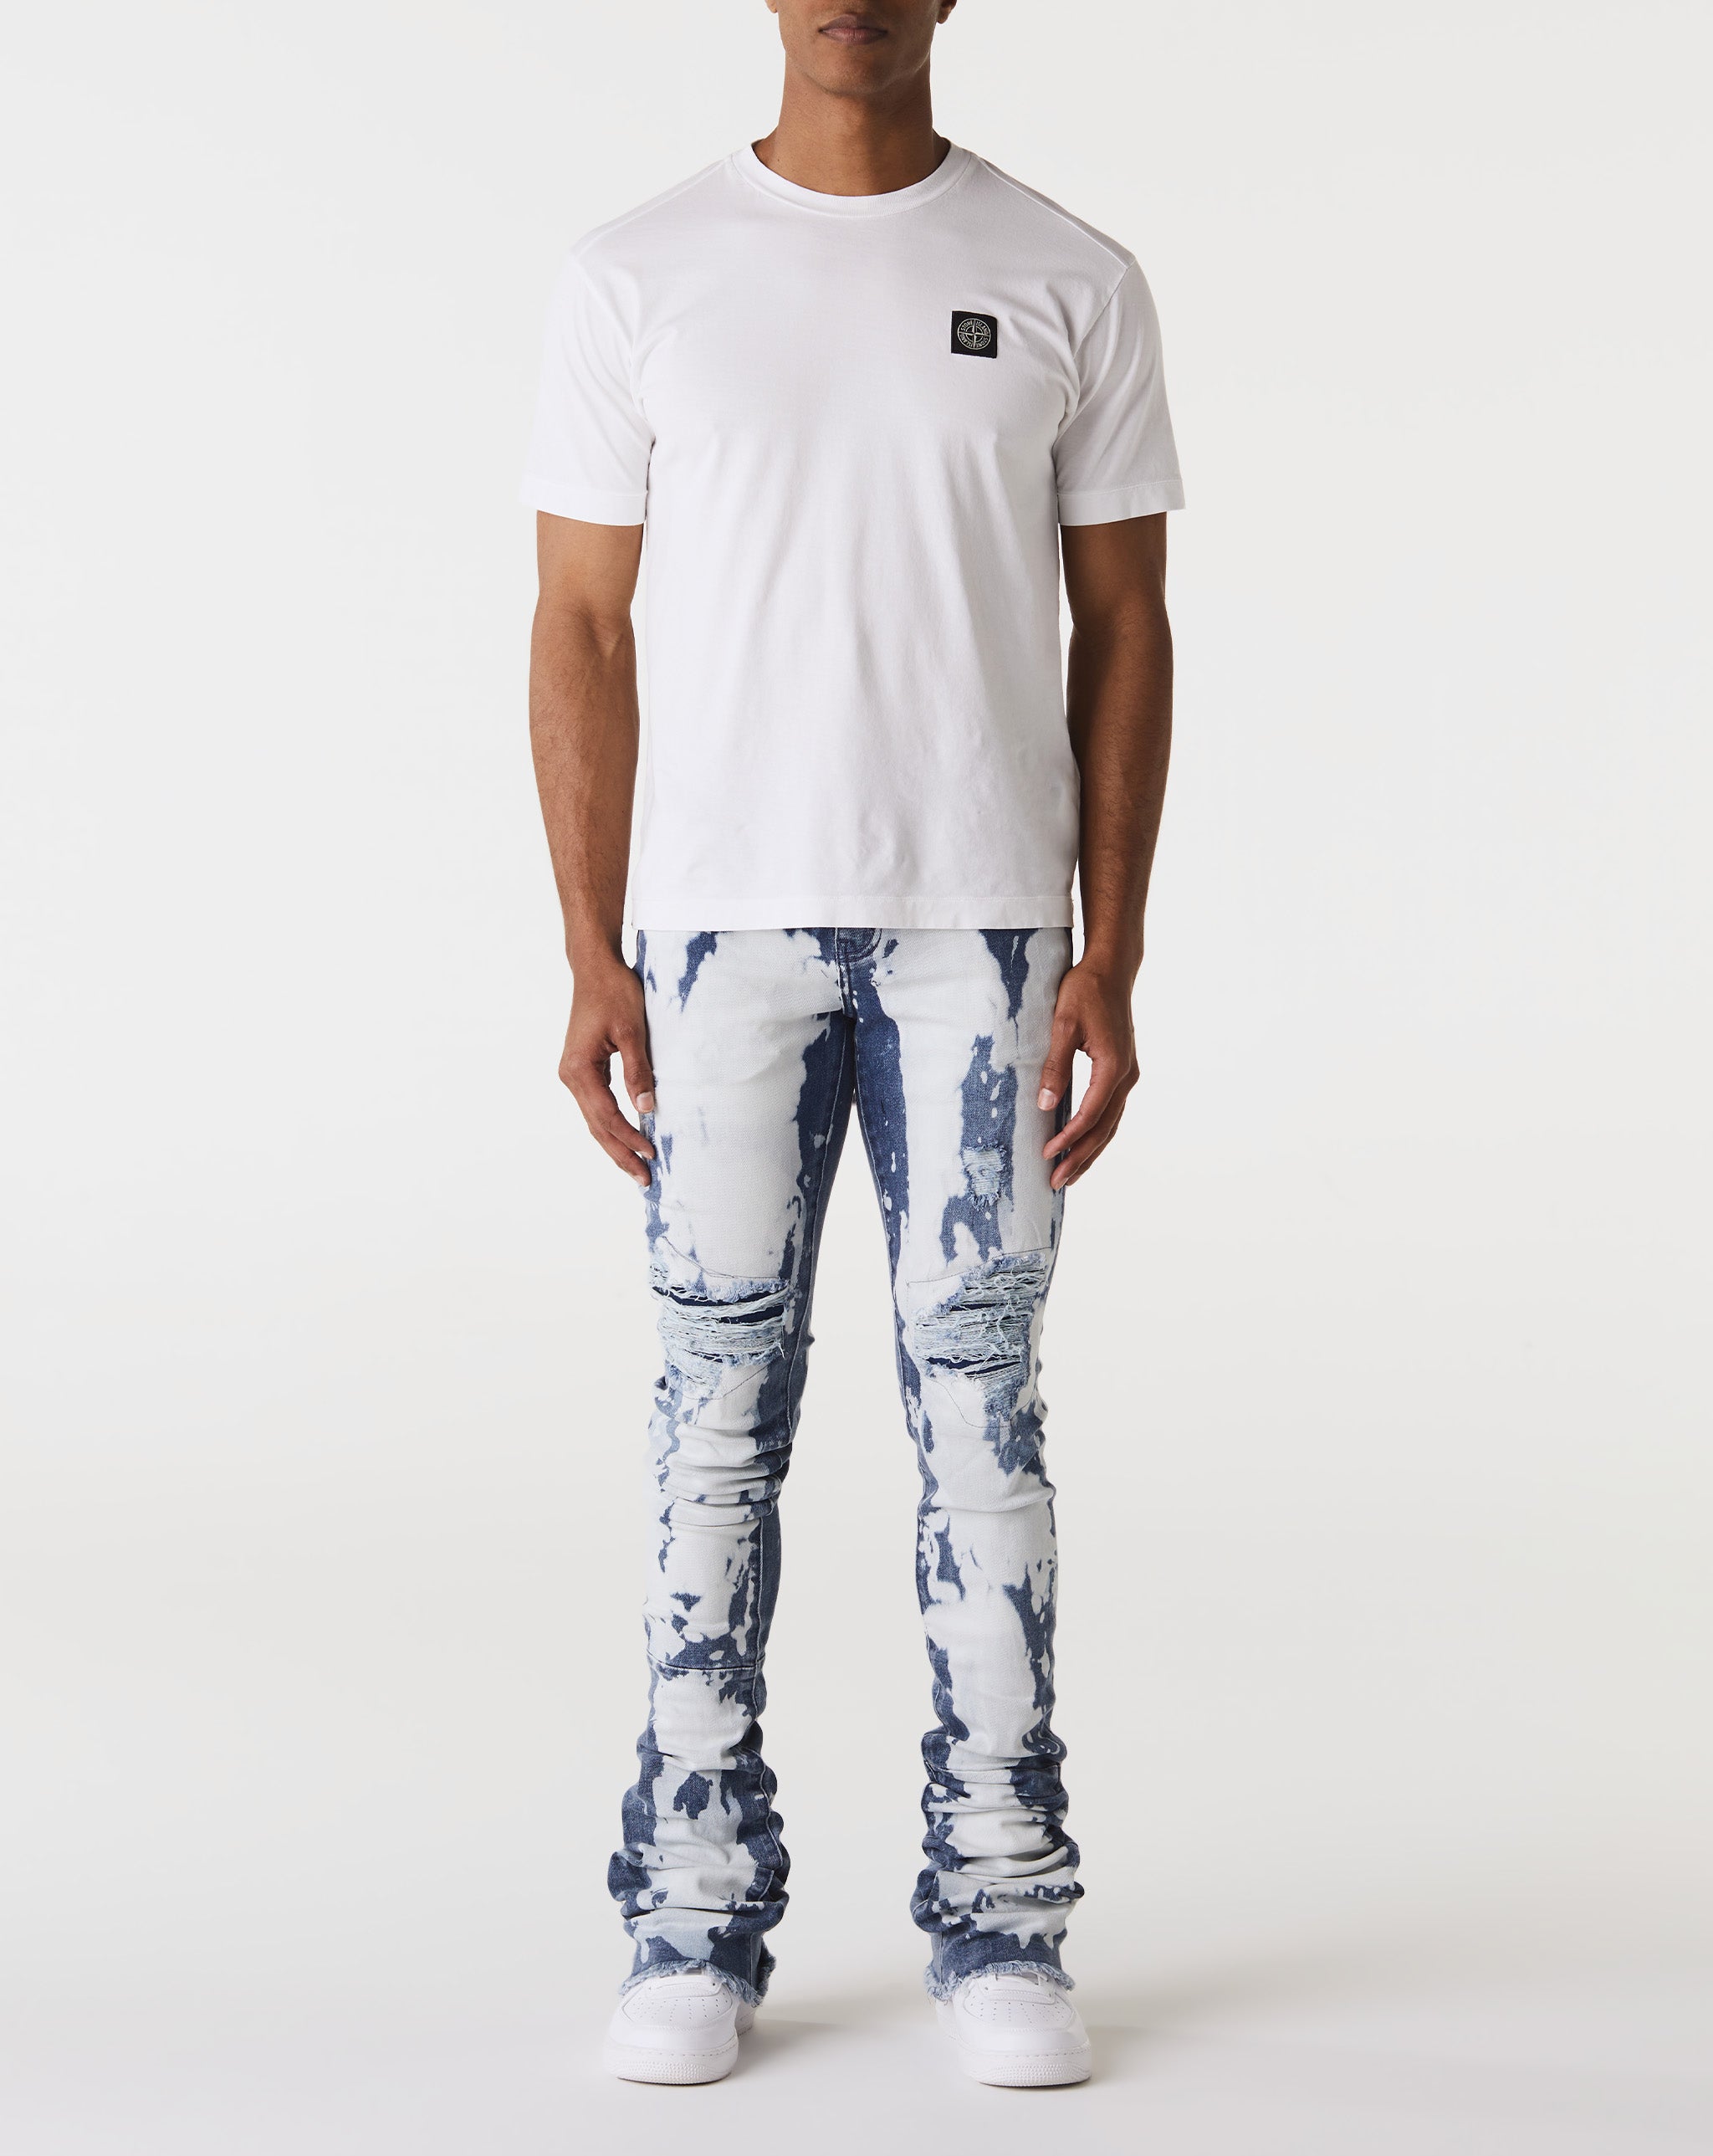 Doctrine Hendrix Stacked Jeans - Rule of Next Apparel